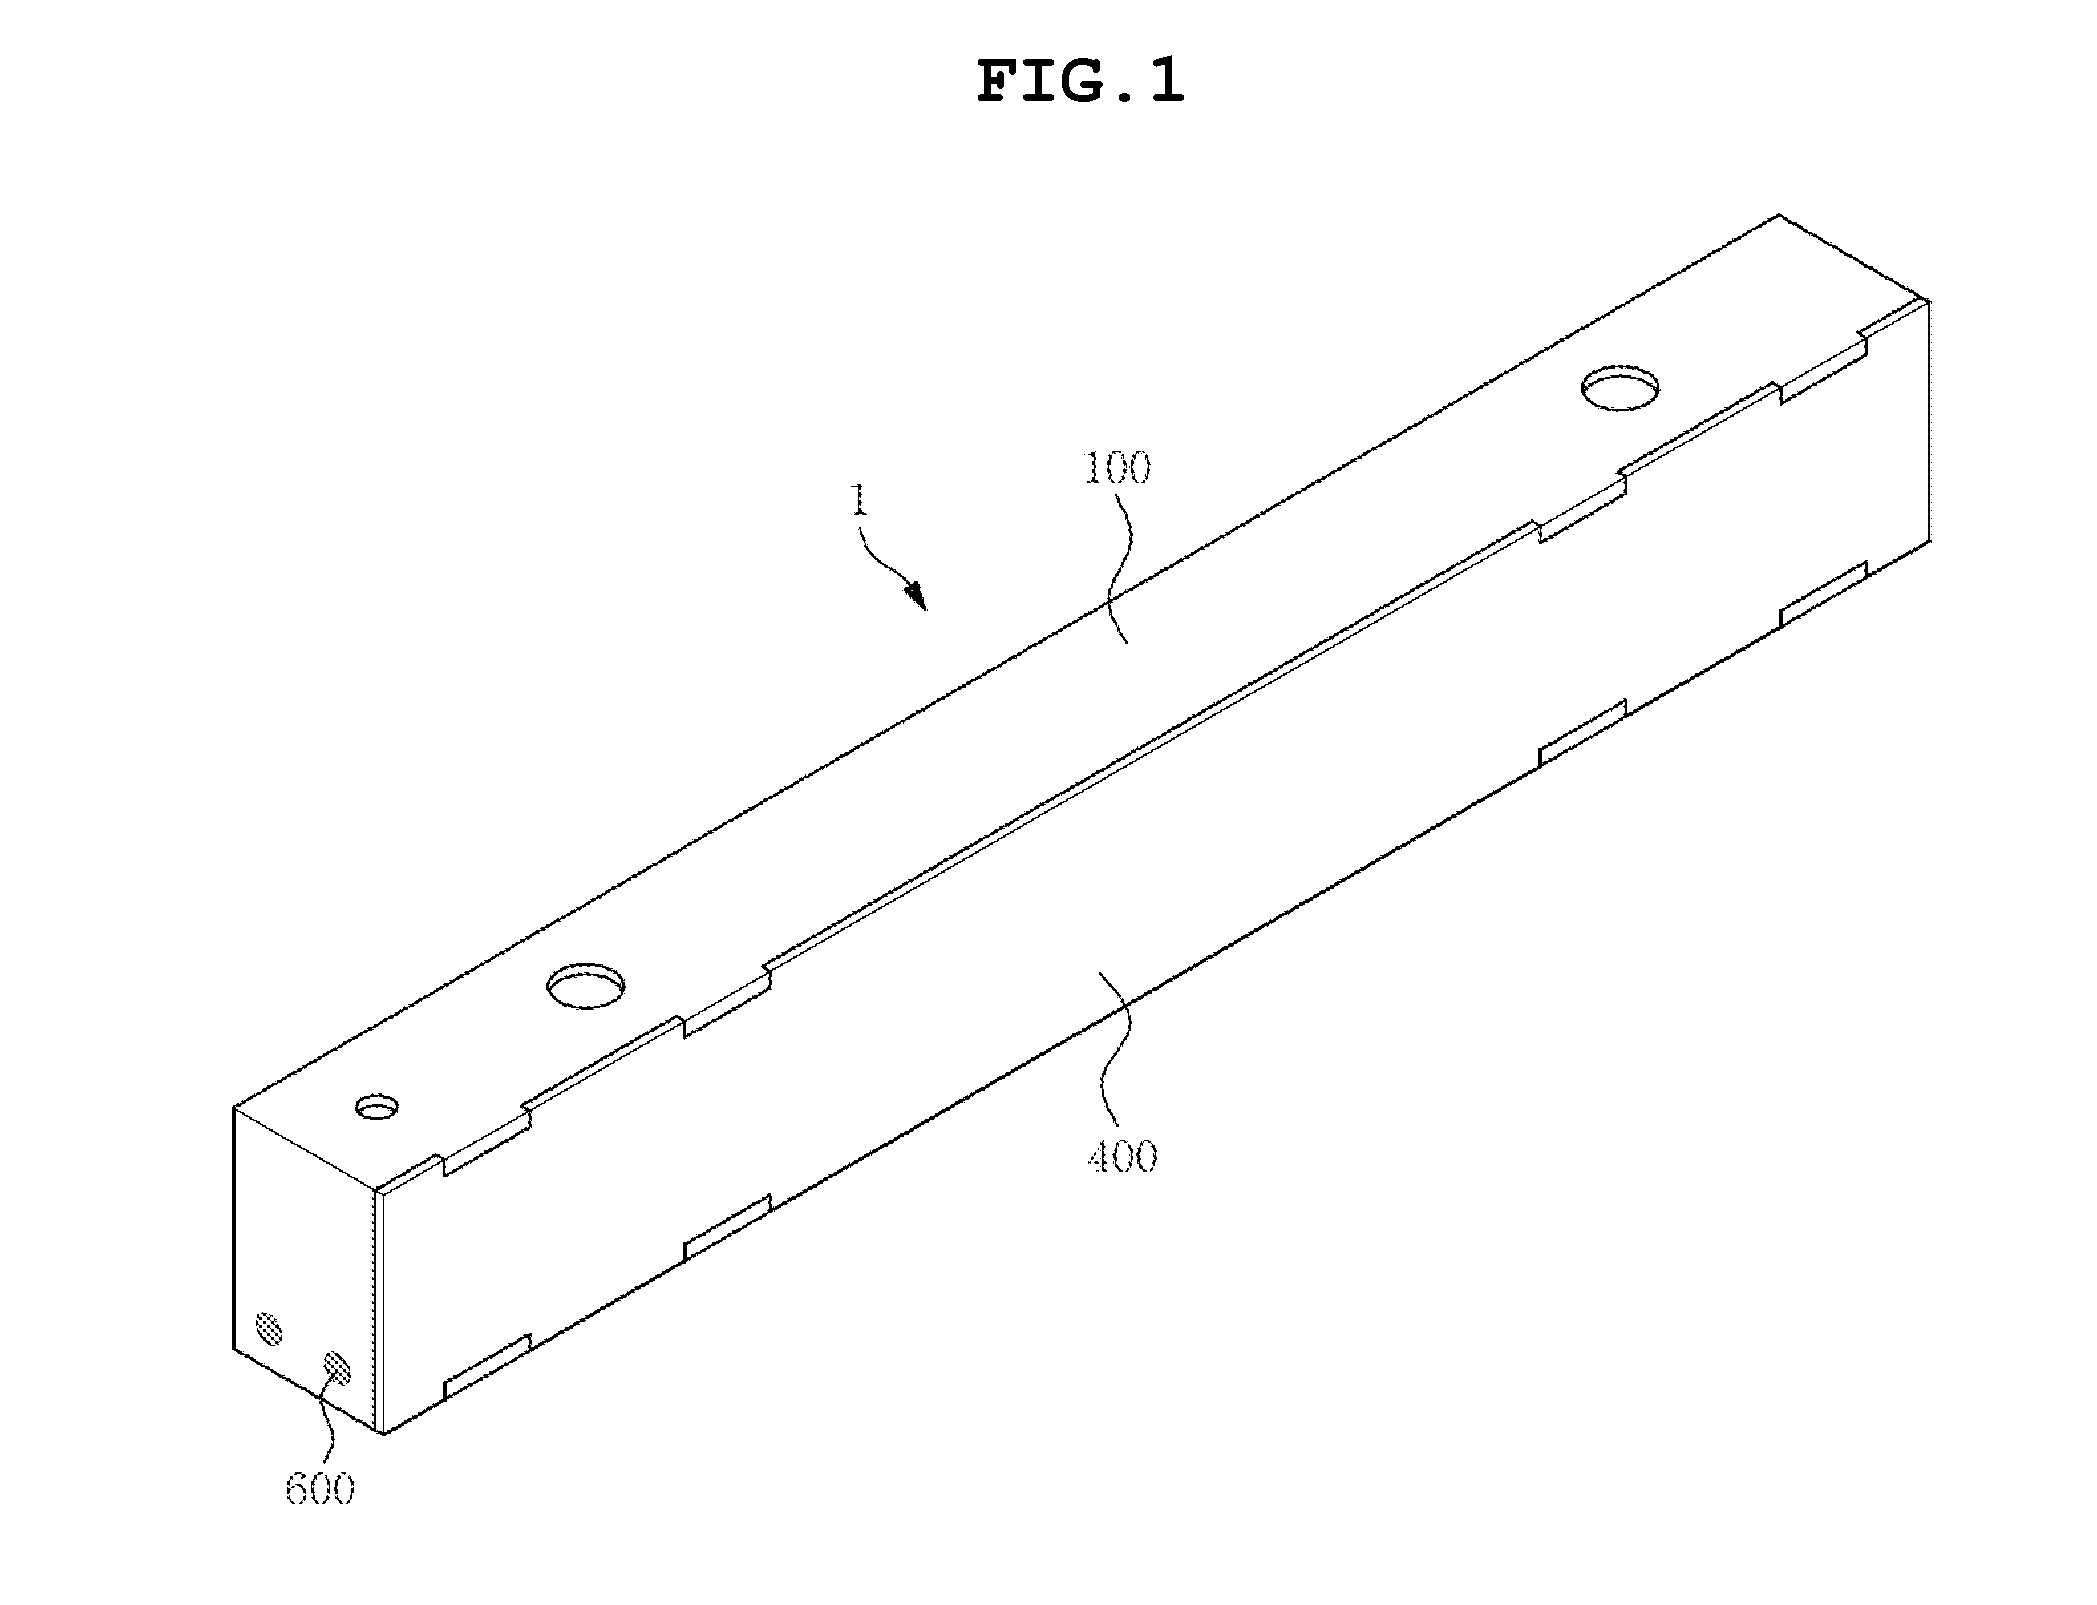 Piezoelectric vibration actuator and method of manufacturing the same